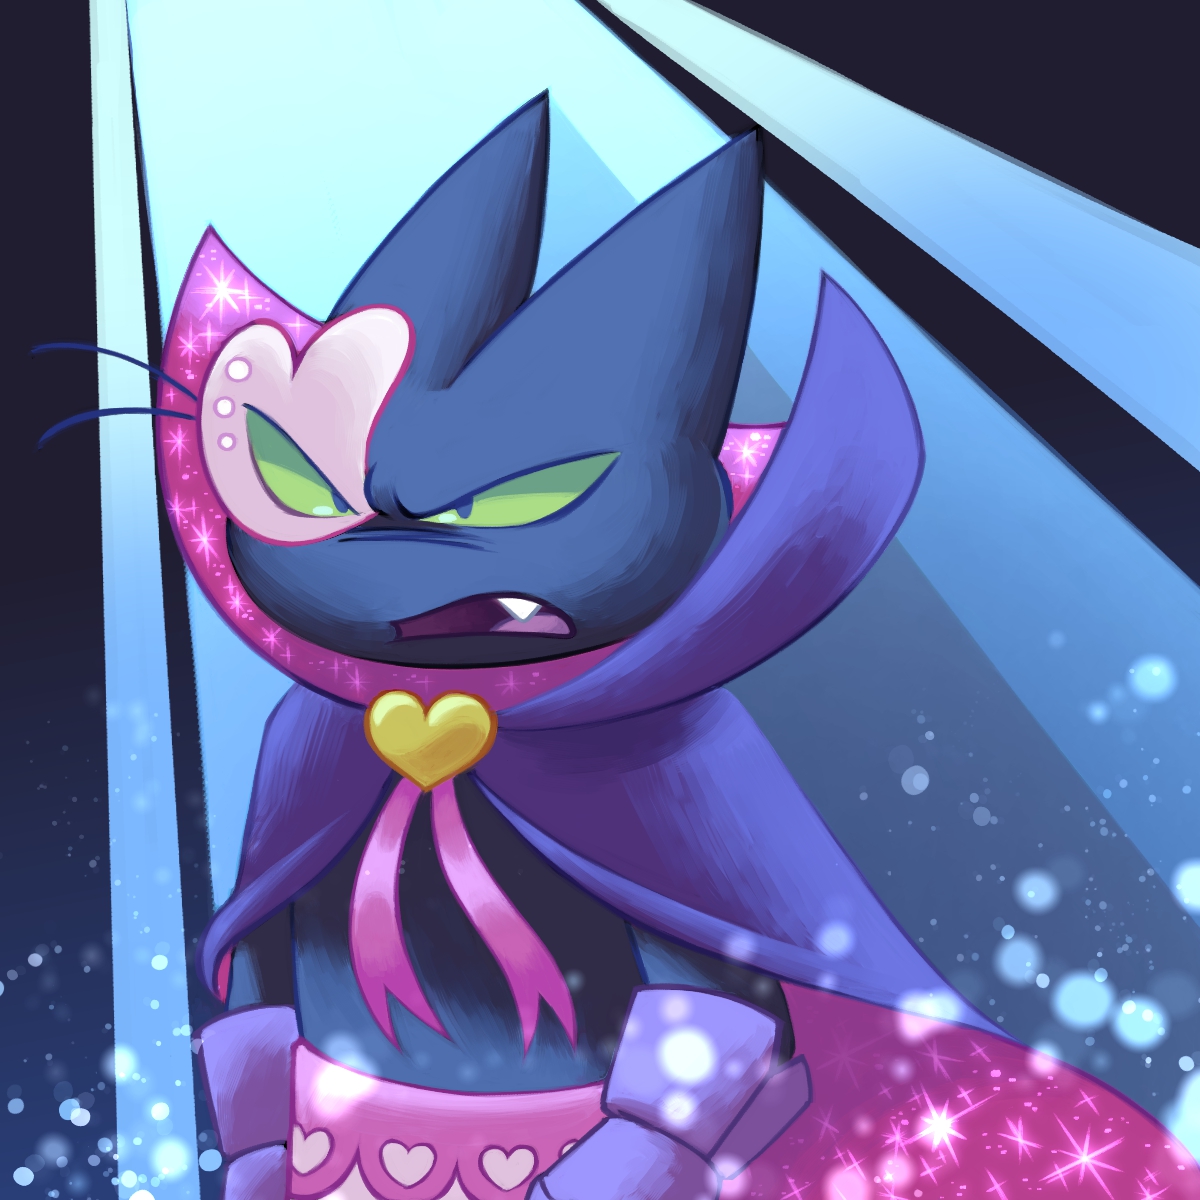 'All.....of the dream,.......how does it mean?' #MaoMao #maomaoheroesofpureheart